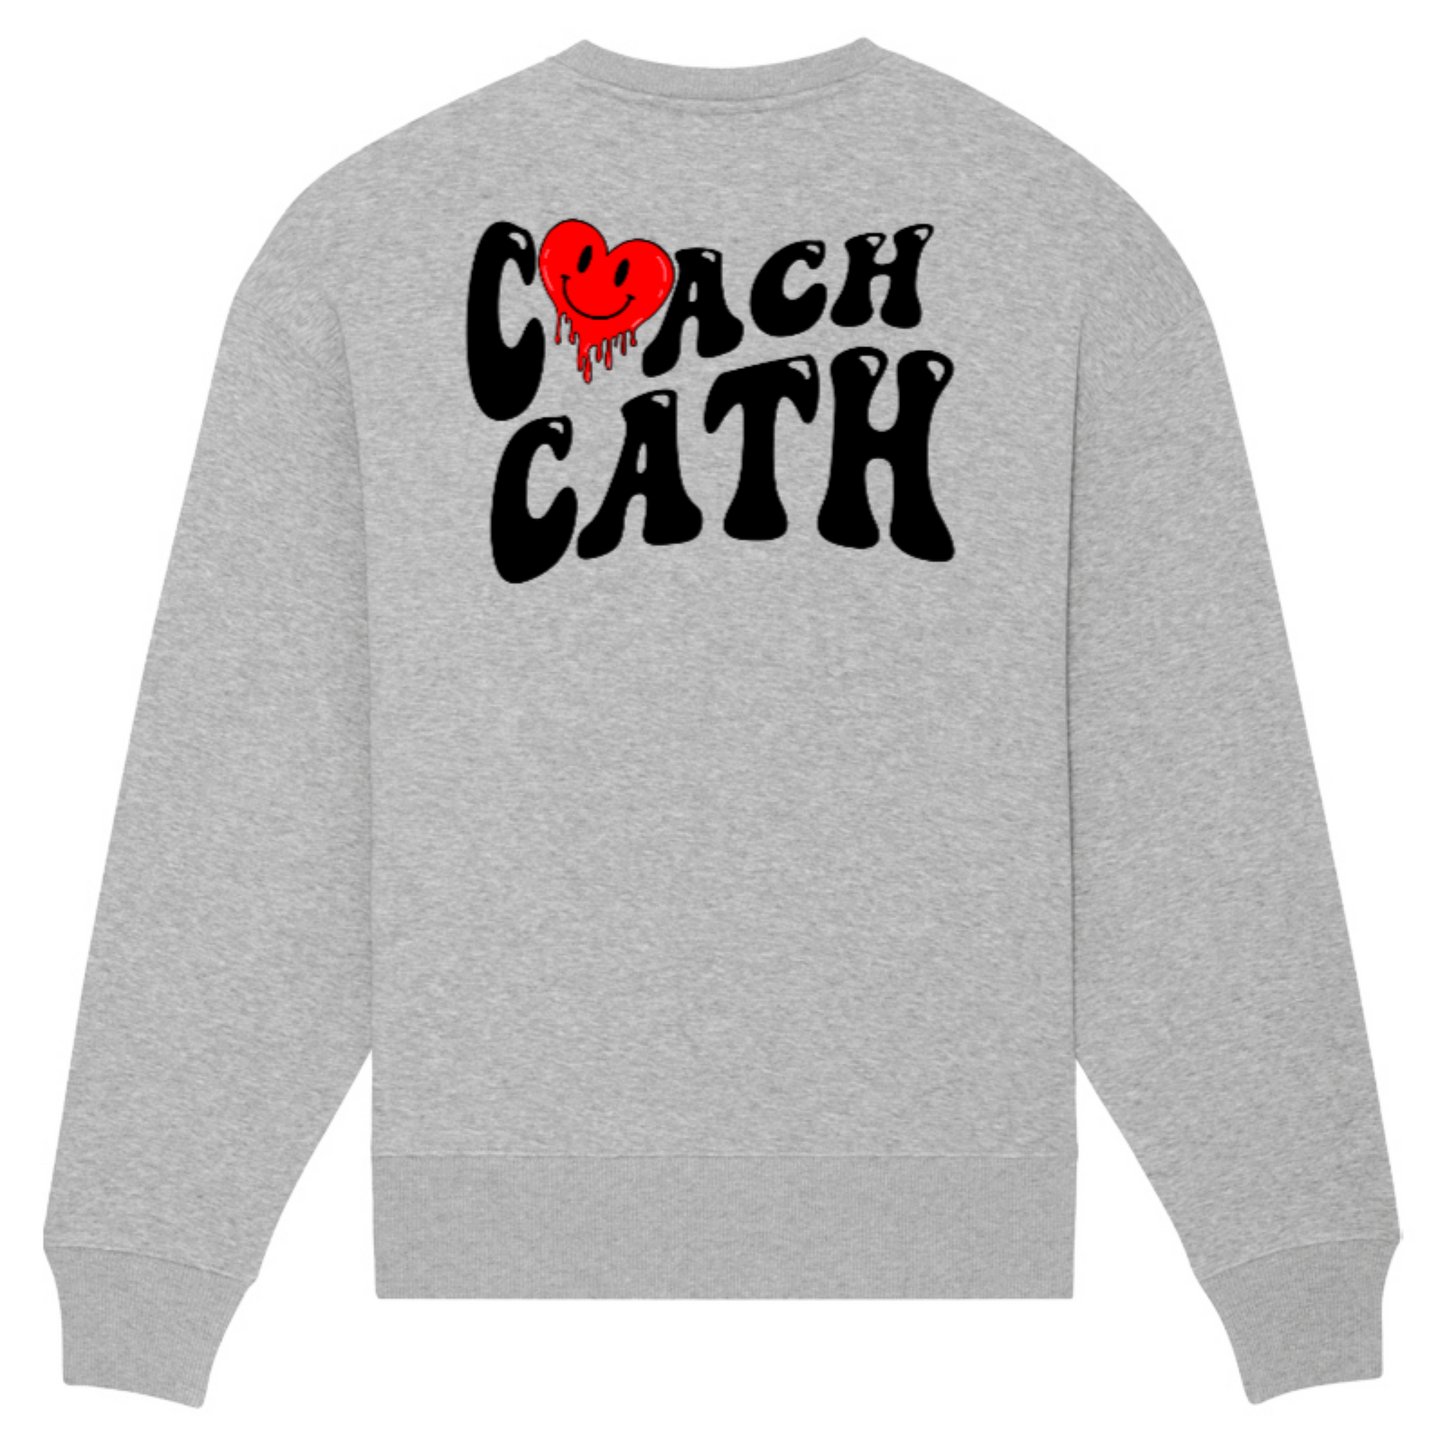 Personalised Wavy Coach Sweater